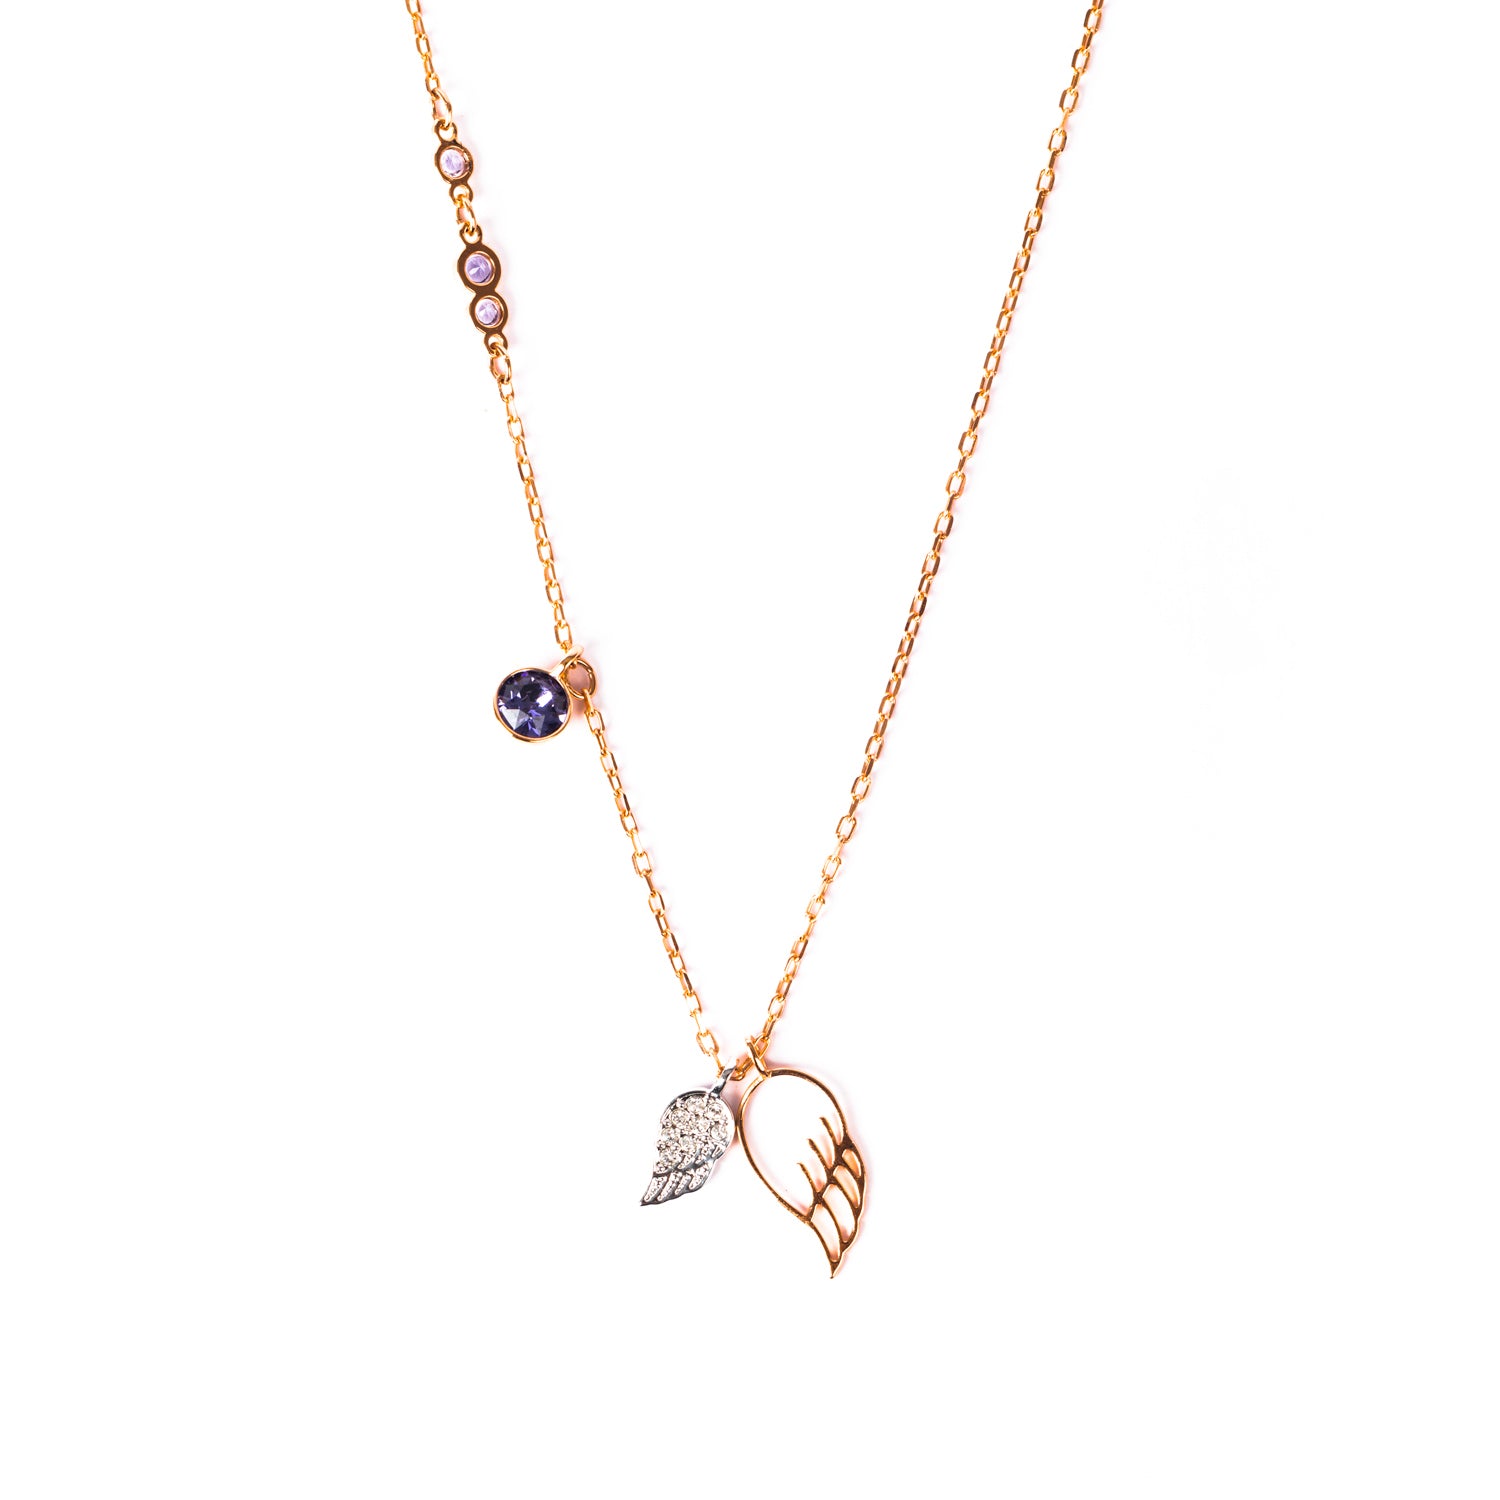 Long chain necklace with leaf charm pendants and violet Swarovski® crystal